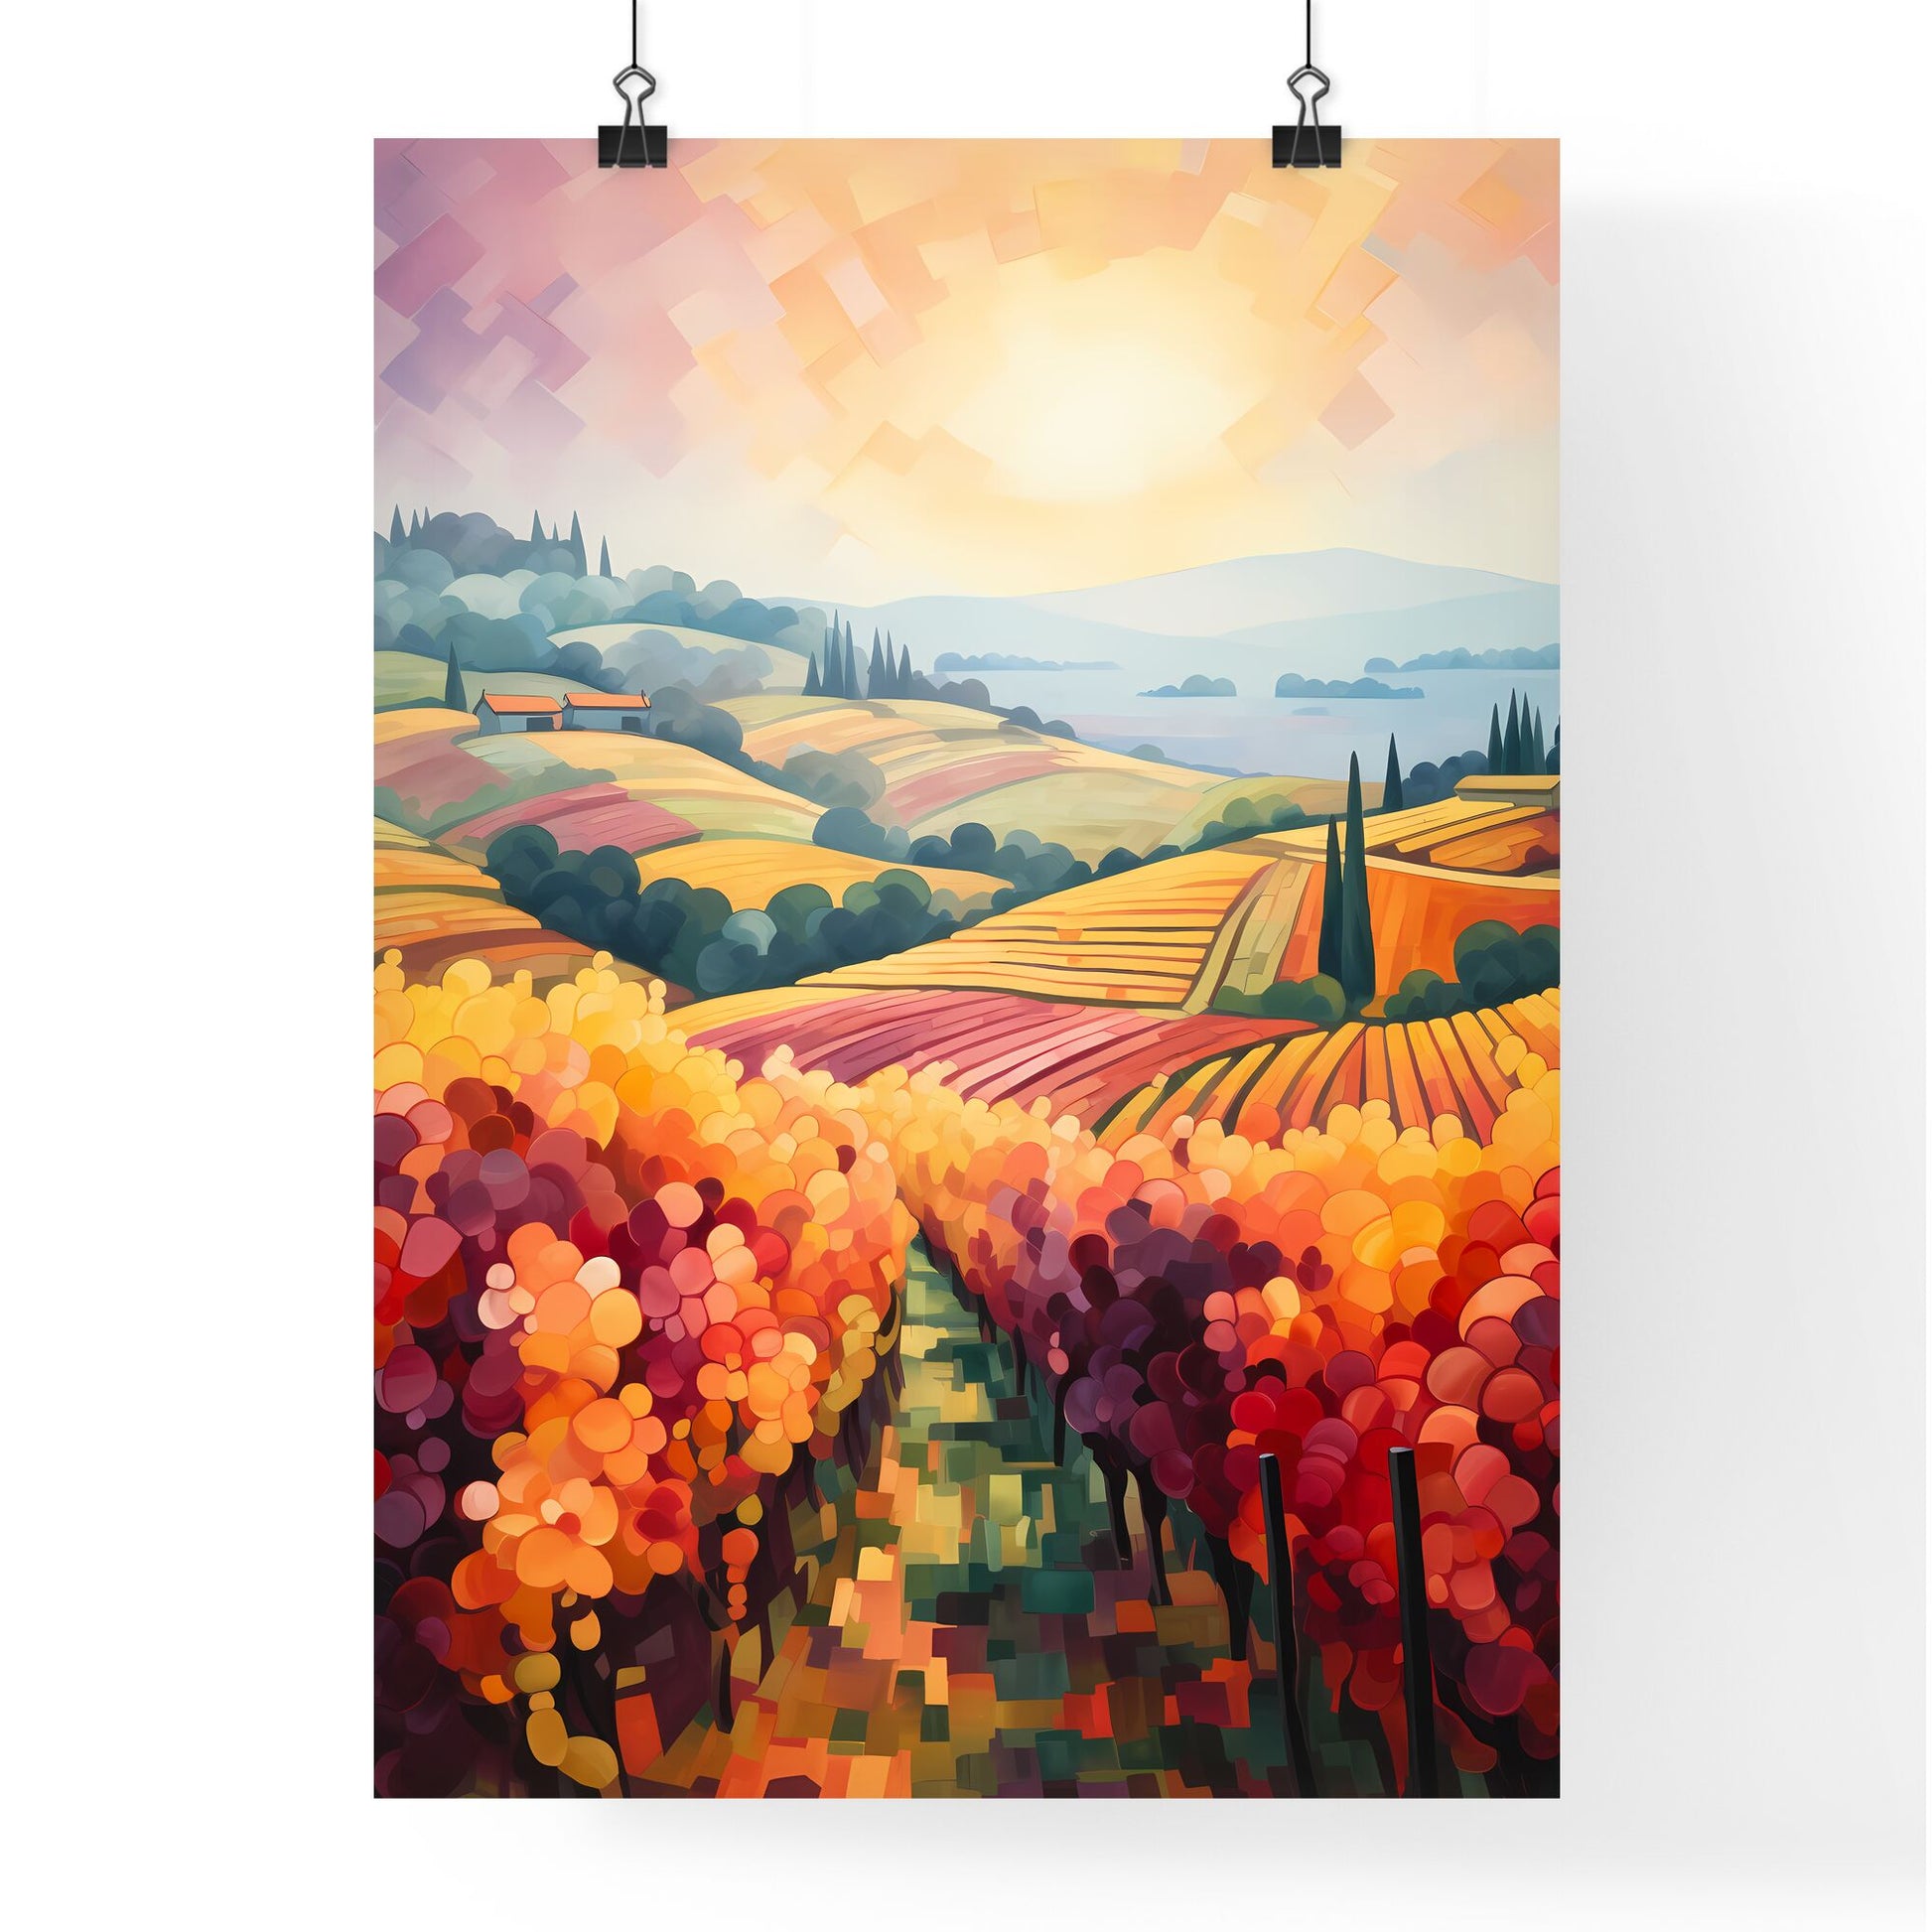 Painting Of A Landscape With Trees And Hills Art Print Default Title